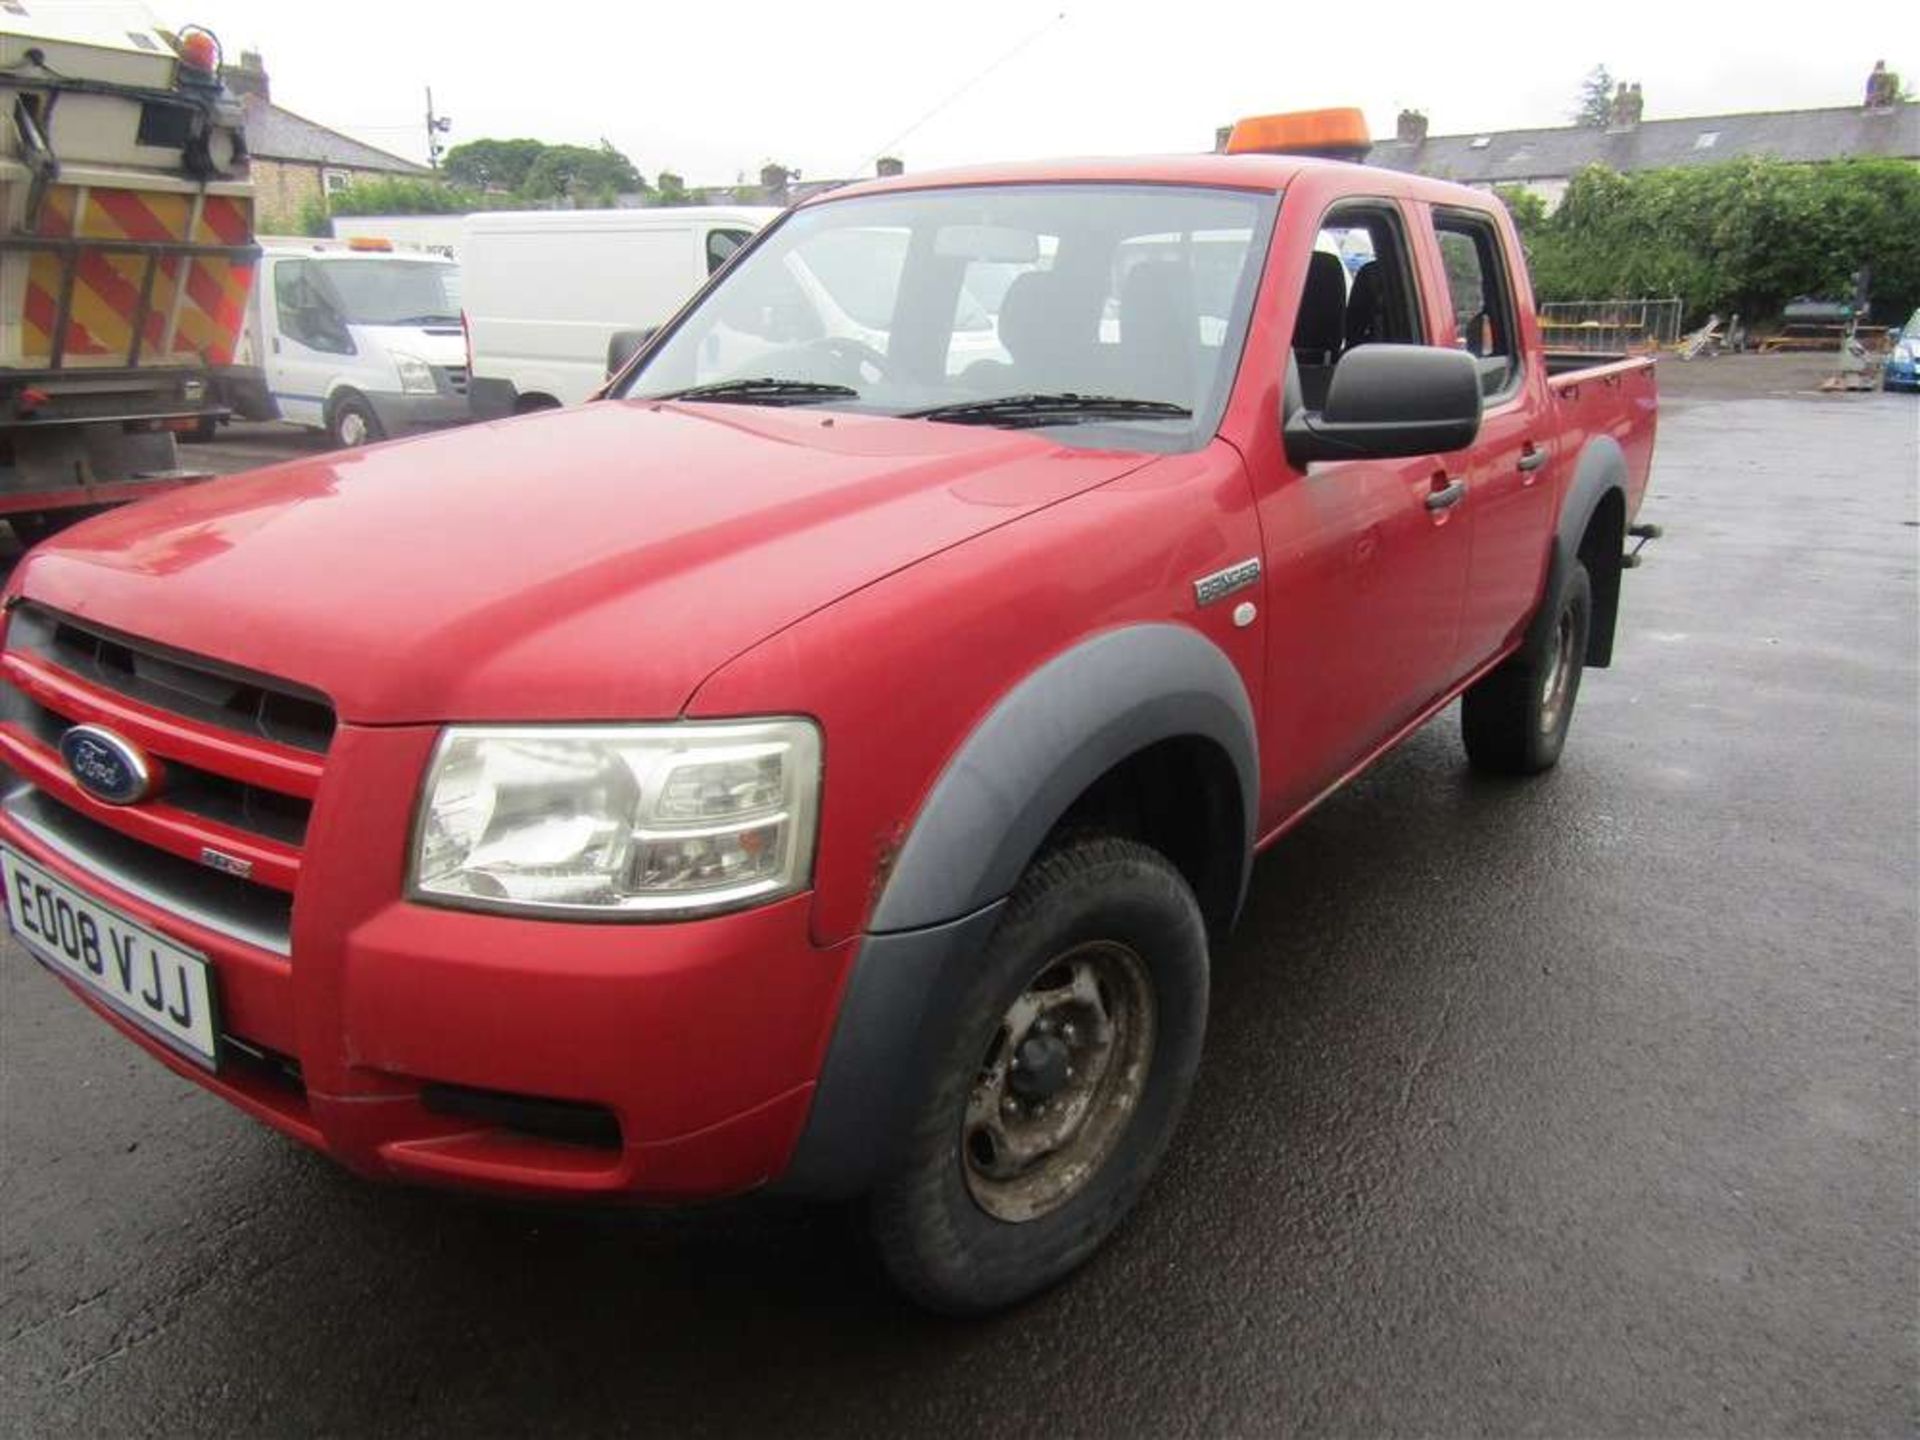 2008 08 reg Ford Ranger D/C 4wd Pickup - 27056m Warranted Mileage - Image 2 of 8